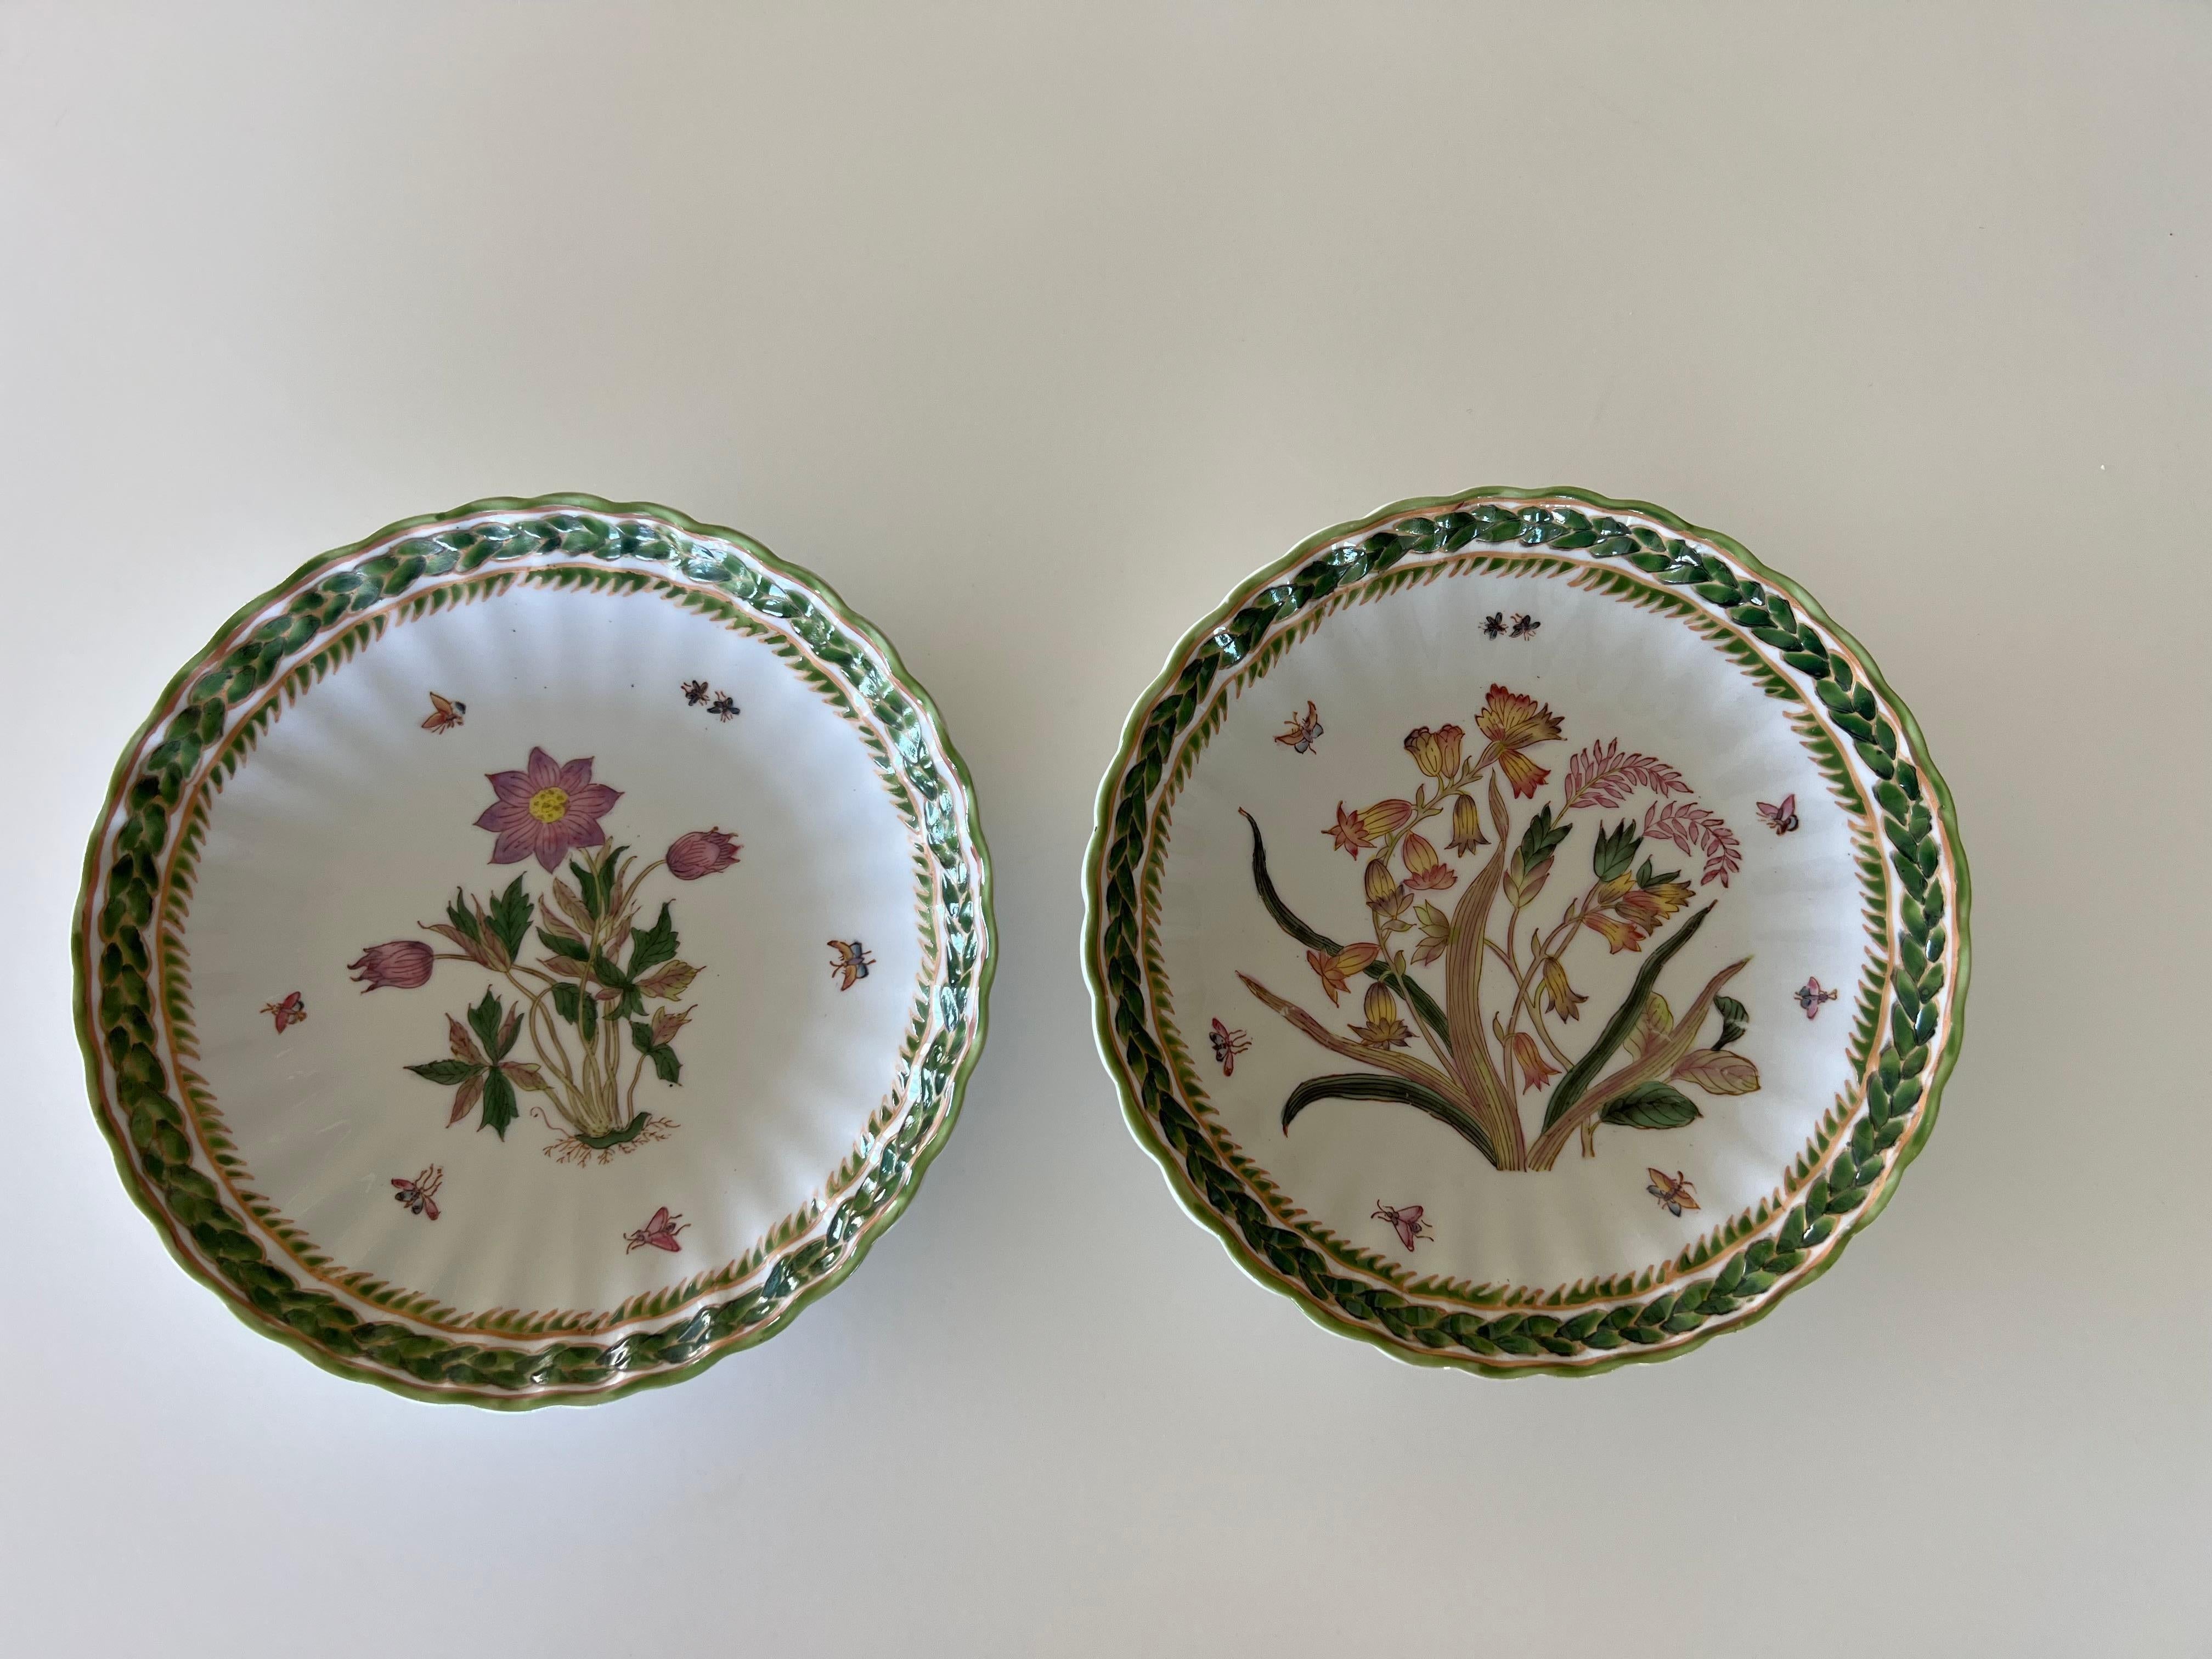 Ceramic Decorative Flower and Vegetation Chinese Plate Signed WL, 1896 For Sale 4